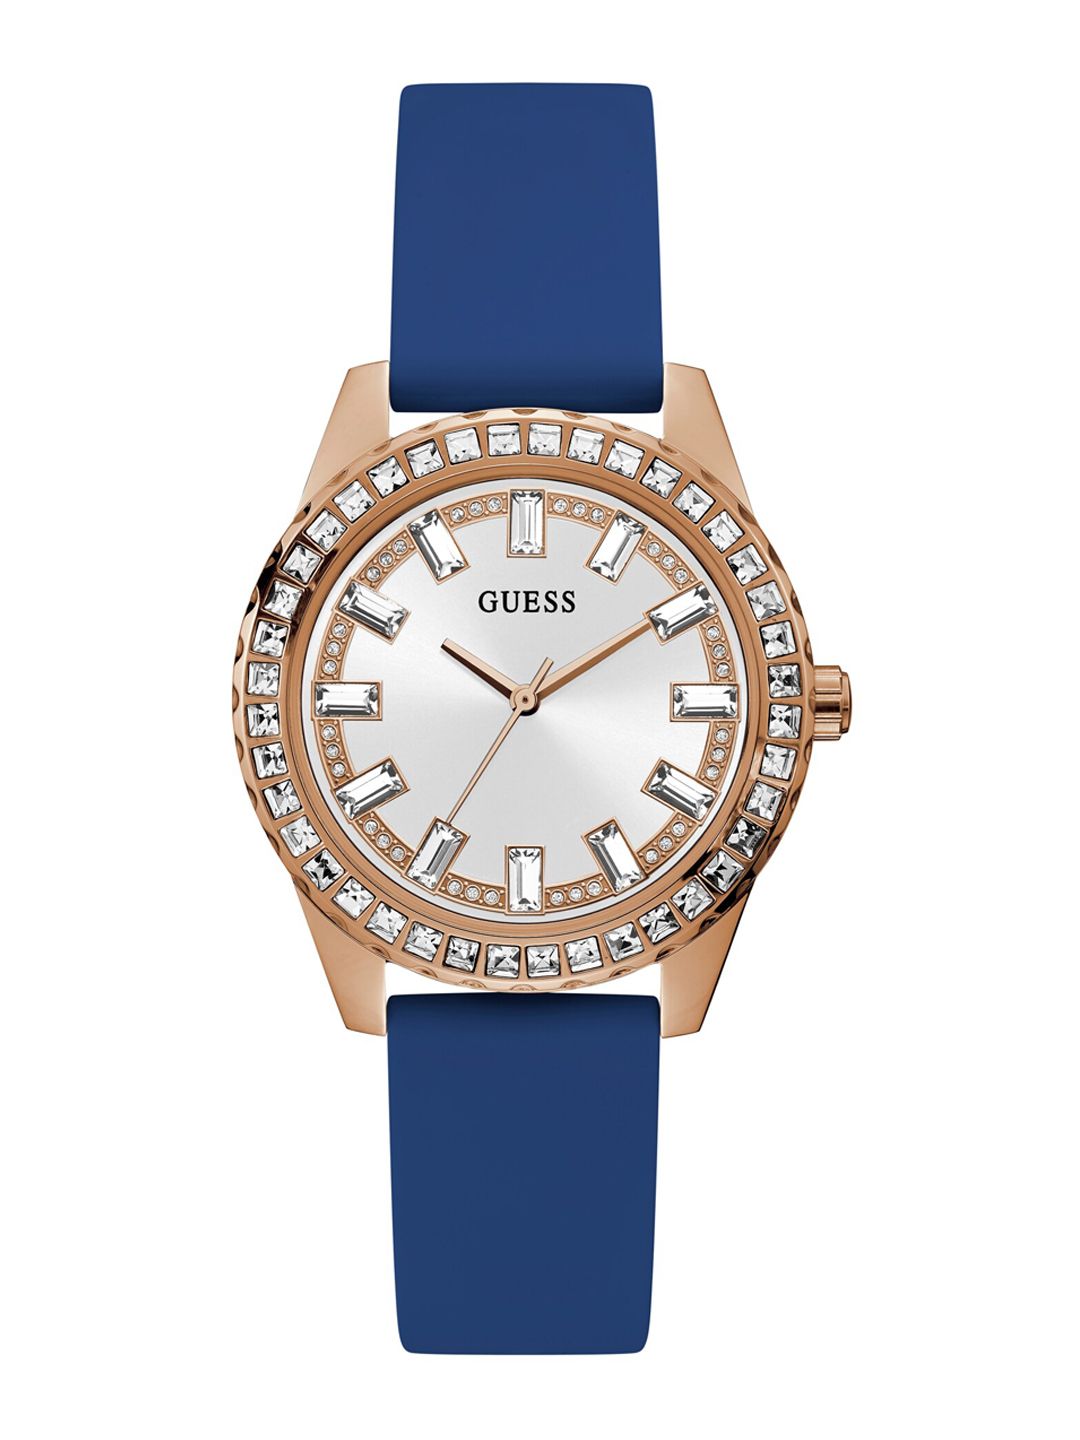 GUESS Women Silver-Toned Dial & Blue Straps Analogue Watch GW0285L1 Price in India